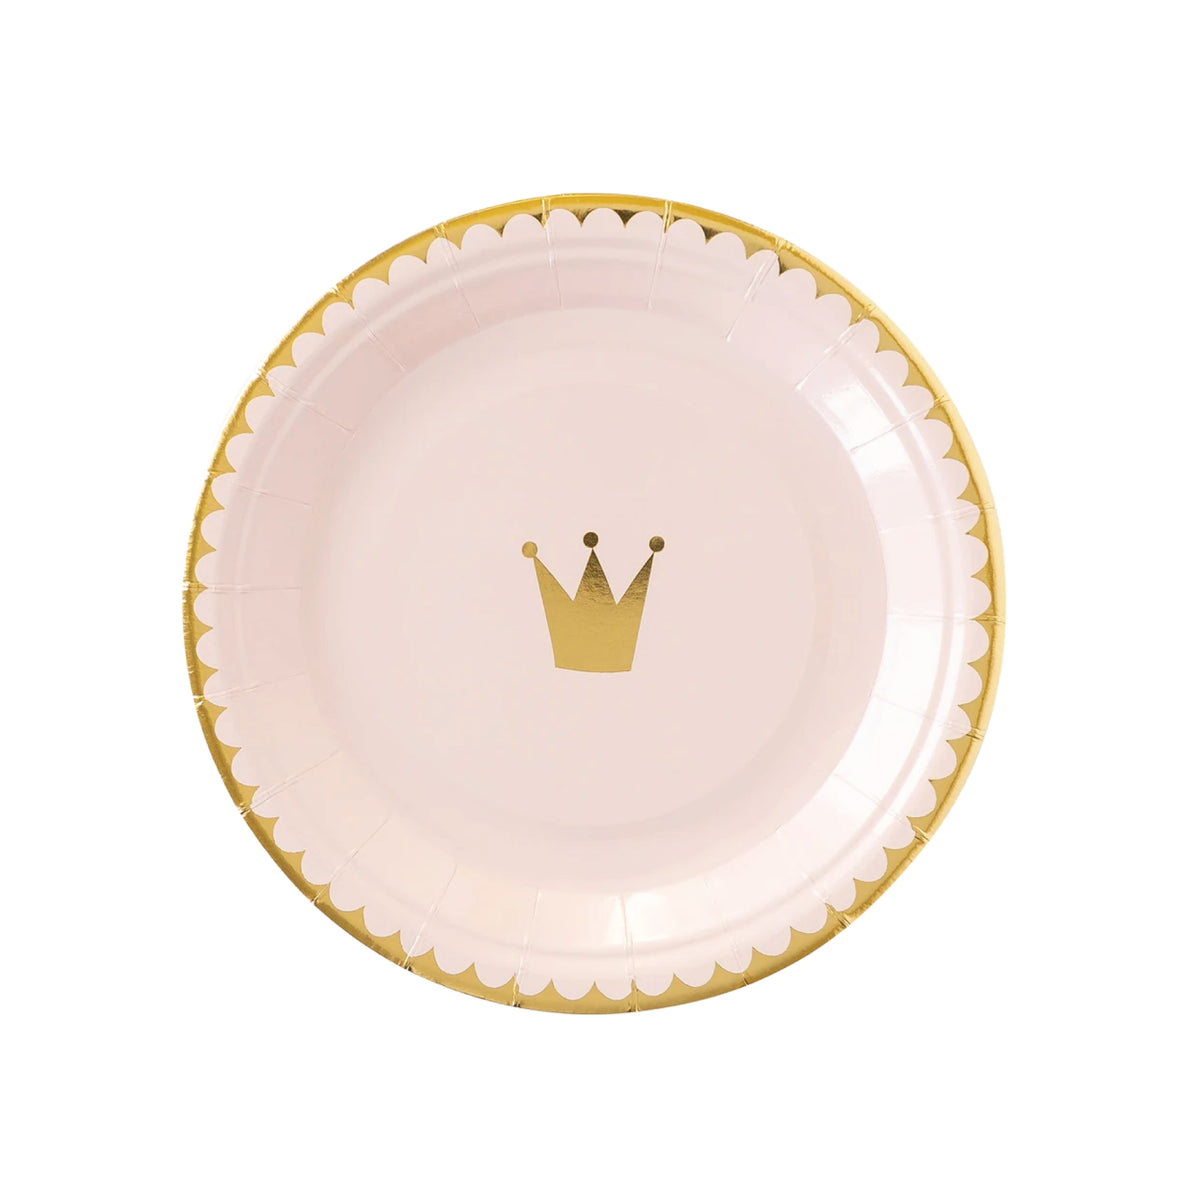 Light Yellow - 8 1/2 Round Paper Plates, 20Ct. - Ultimate Party